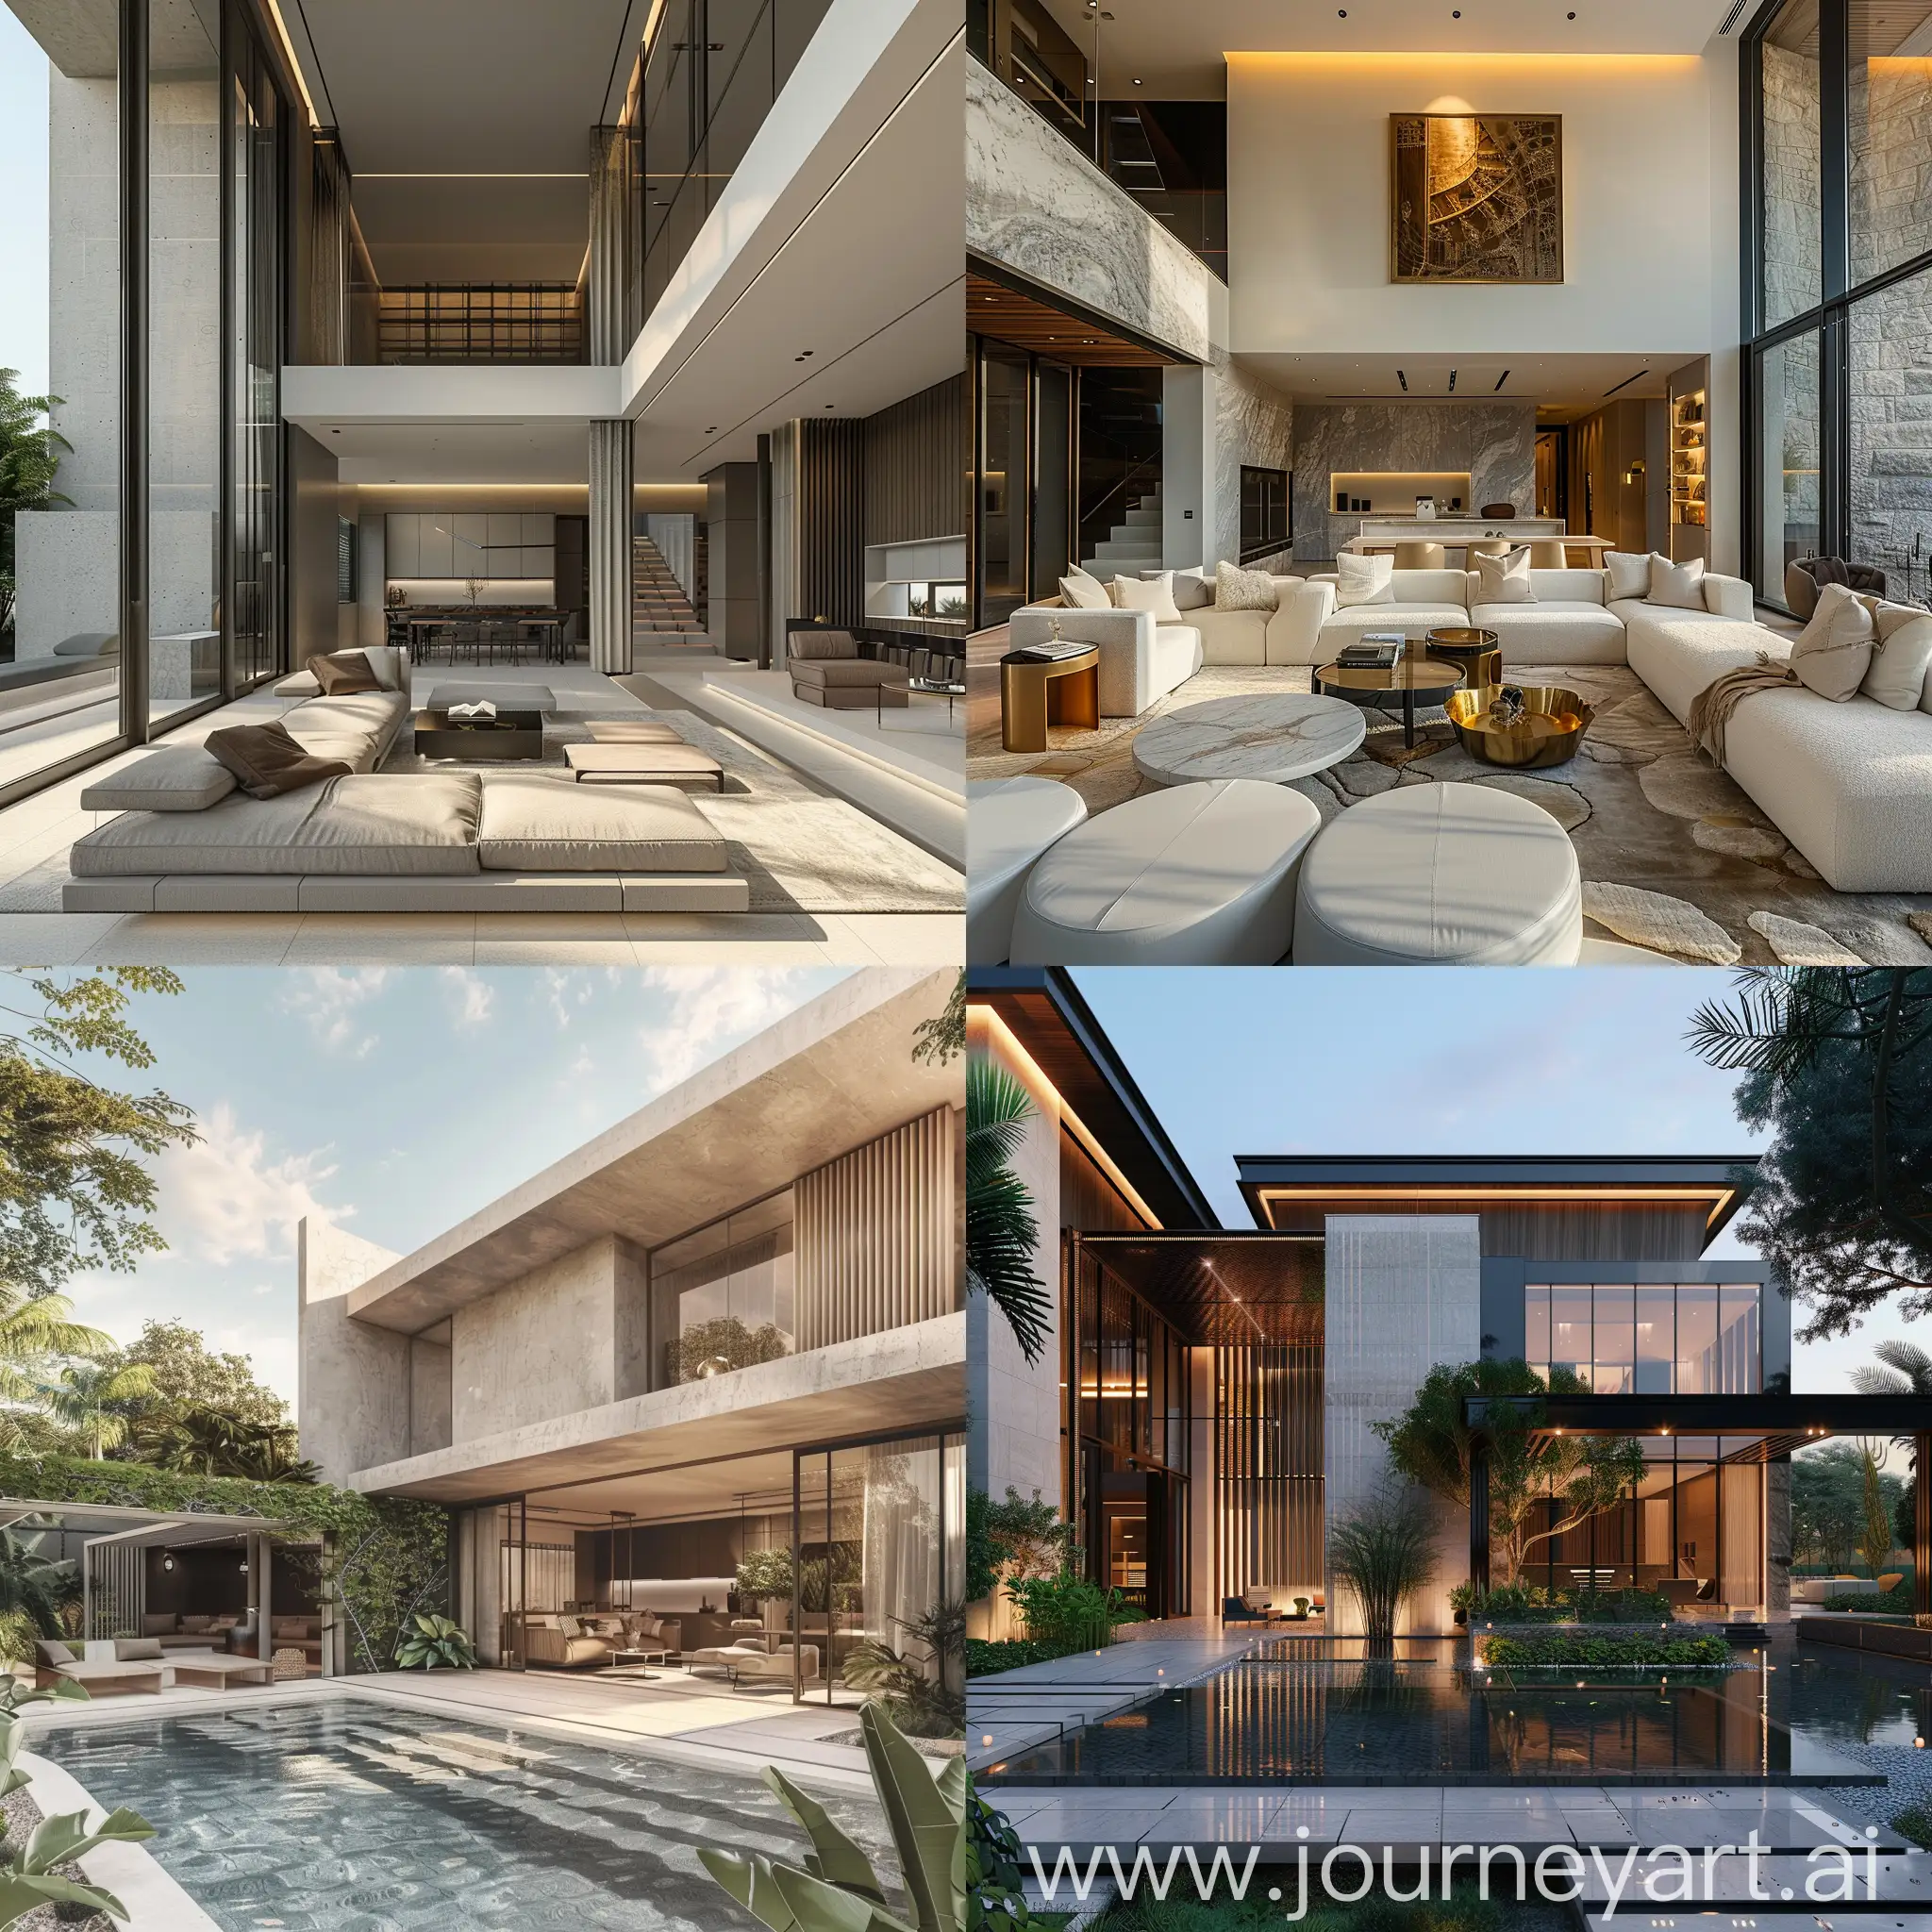 A luxury villa includes bespoke architectural details, unconventional layouts, and rare materials that create a one-of-a-kind ambiance. Modern and simple style